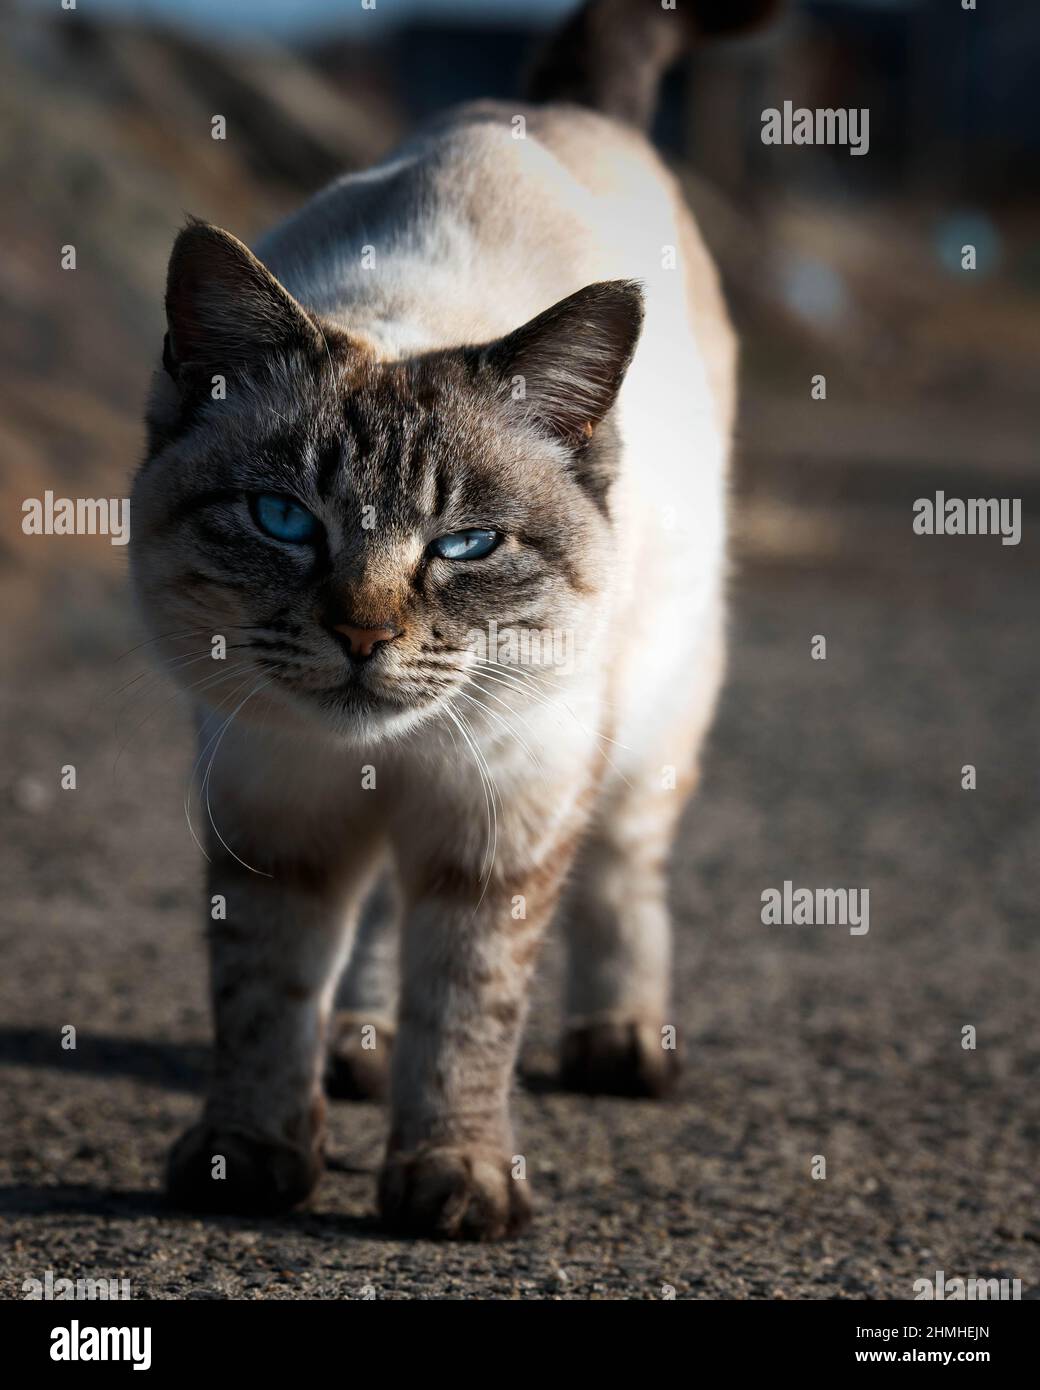 A stray or feral cat with blue eyes staring at the camera Stock Photo